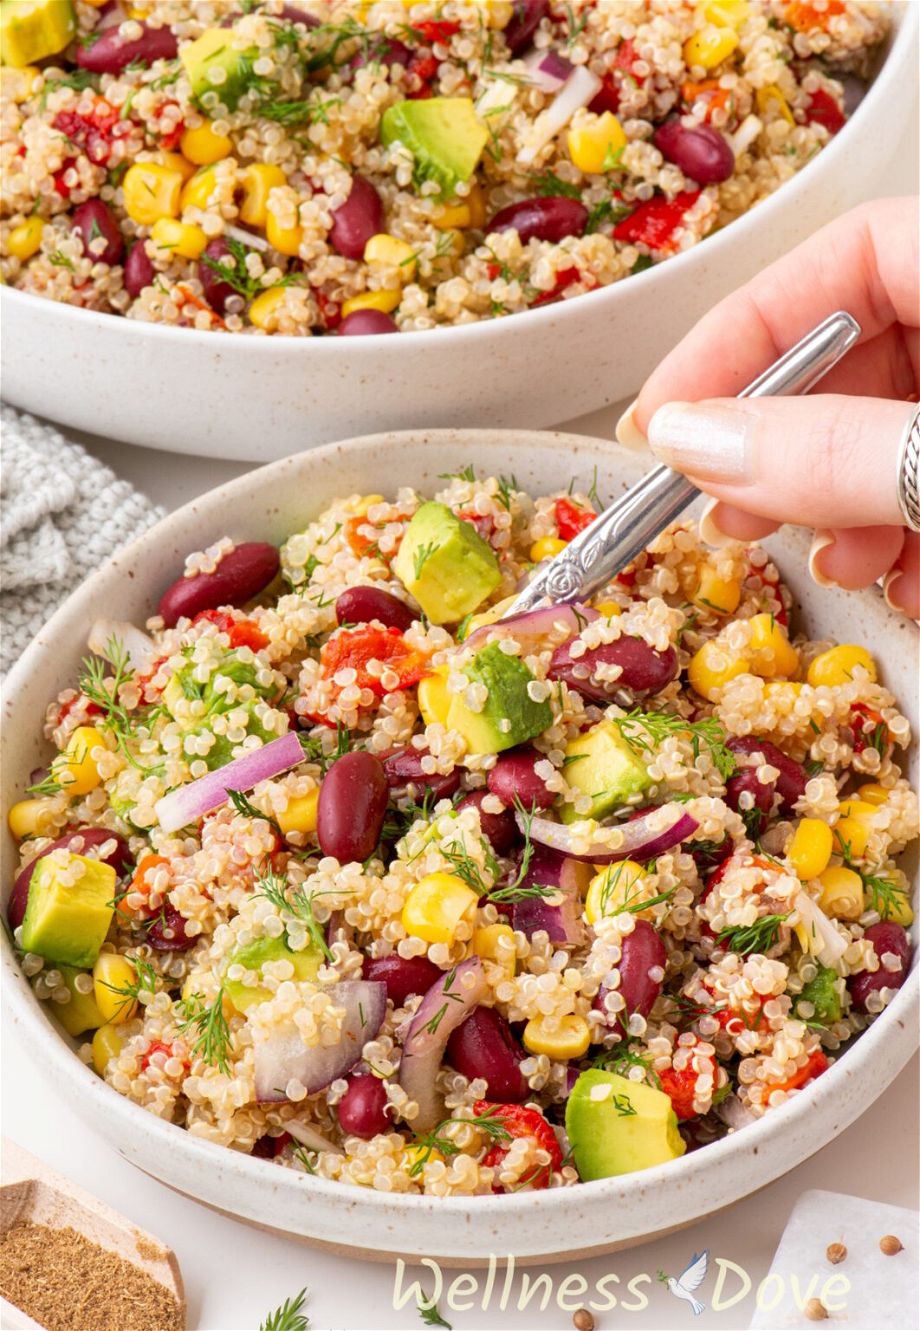 Avocado Quinoa Salad with Roasted Peppers | Vegan + Oil-free